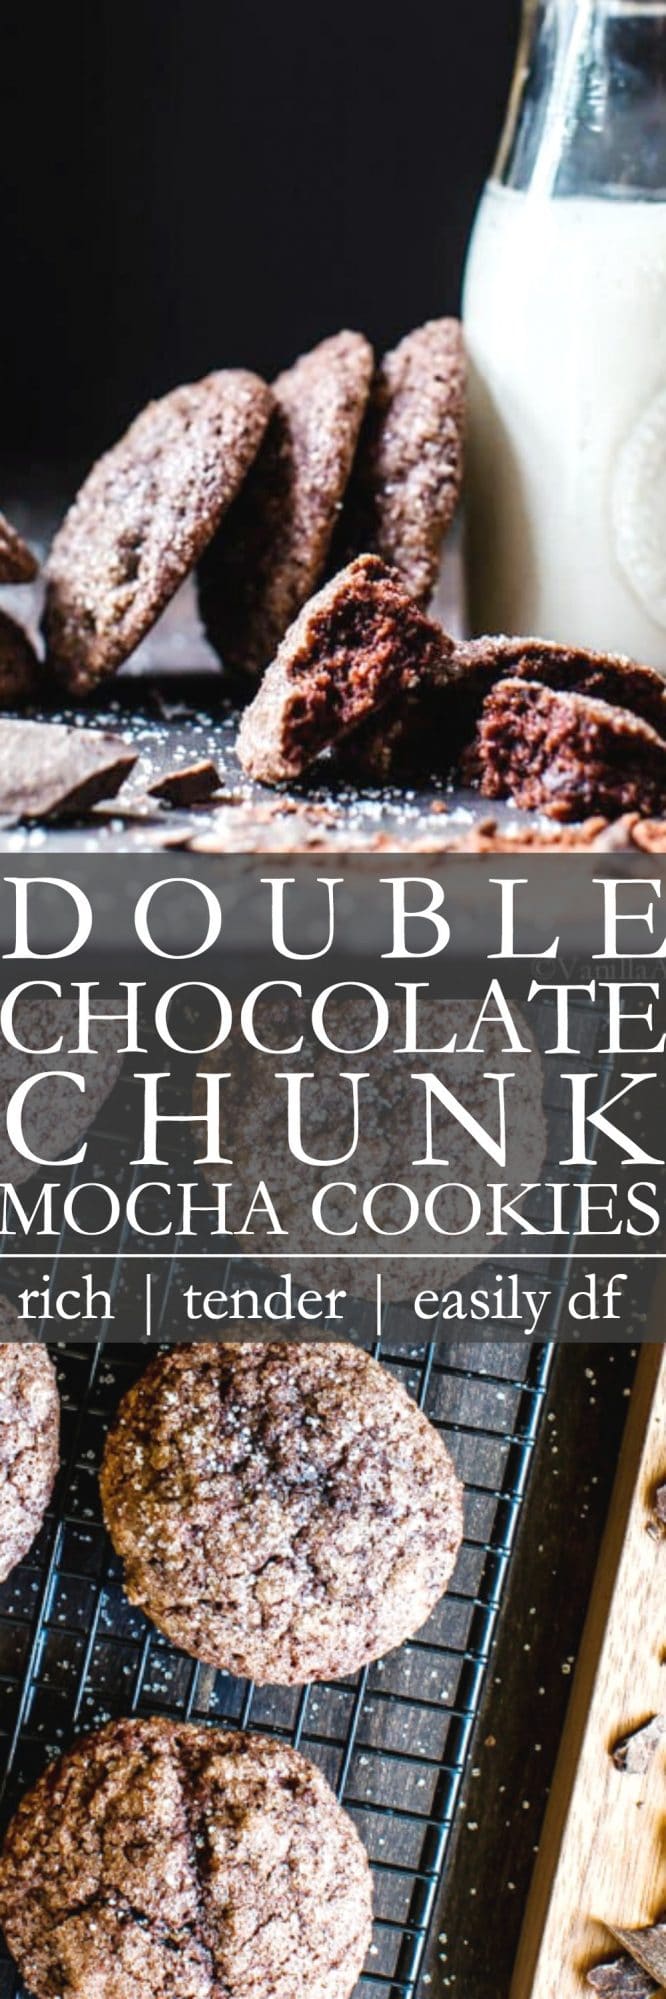 Pinterest pin for Double chocolate chunk mocha cookies. 